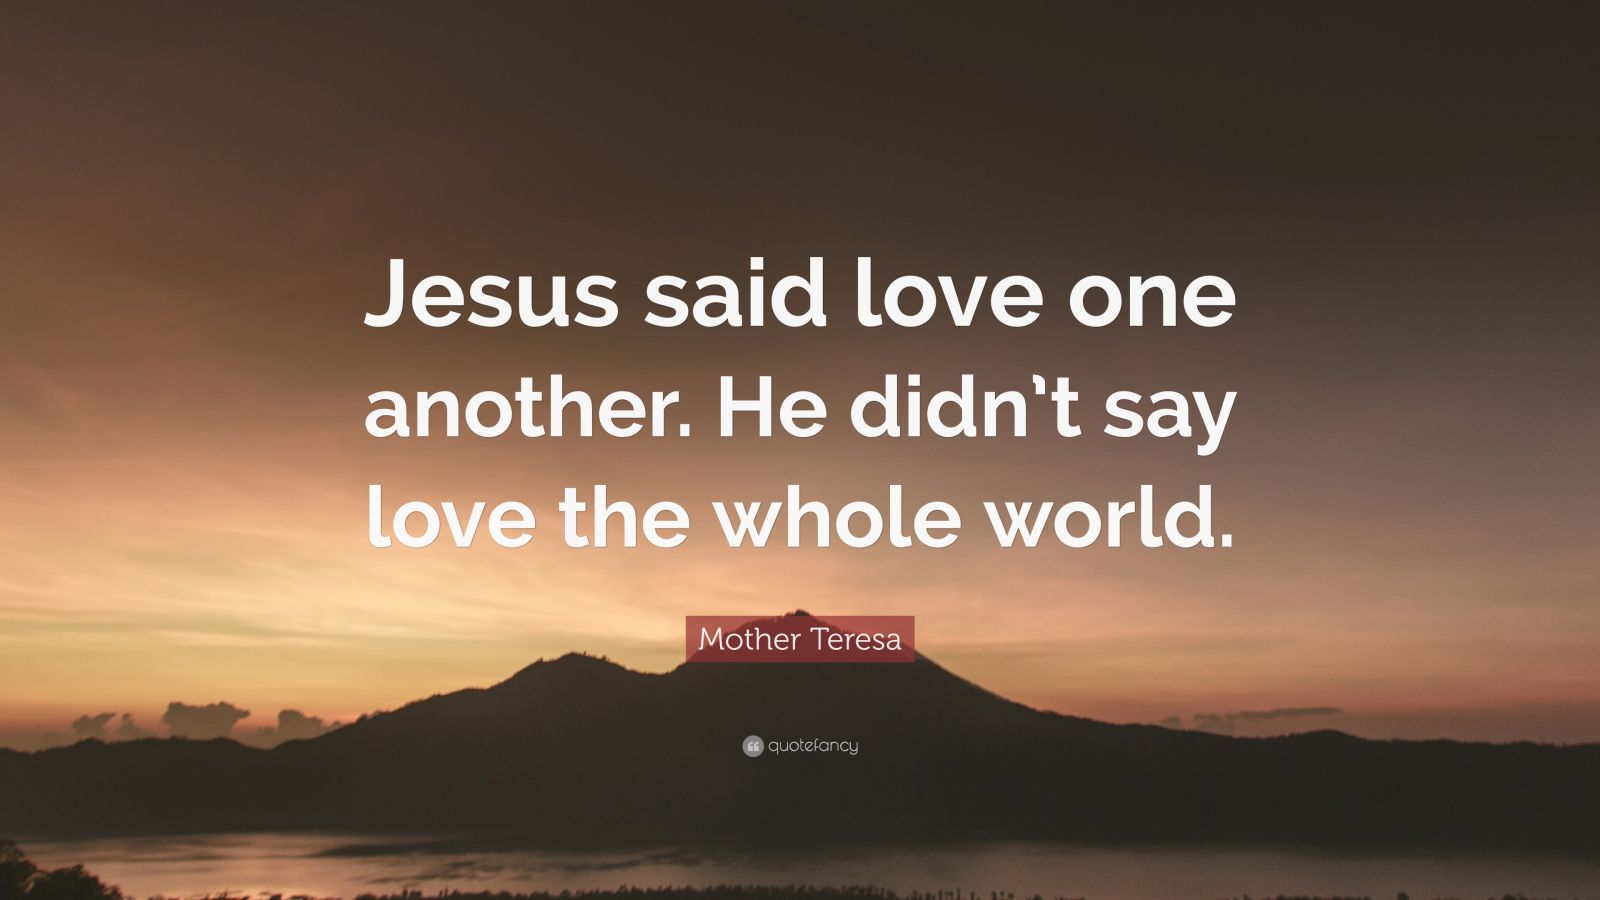 Mother Teresa Quote: “Jesus said love one another. He didn’t say love ...